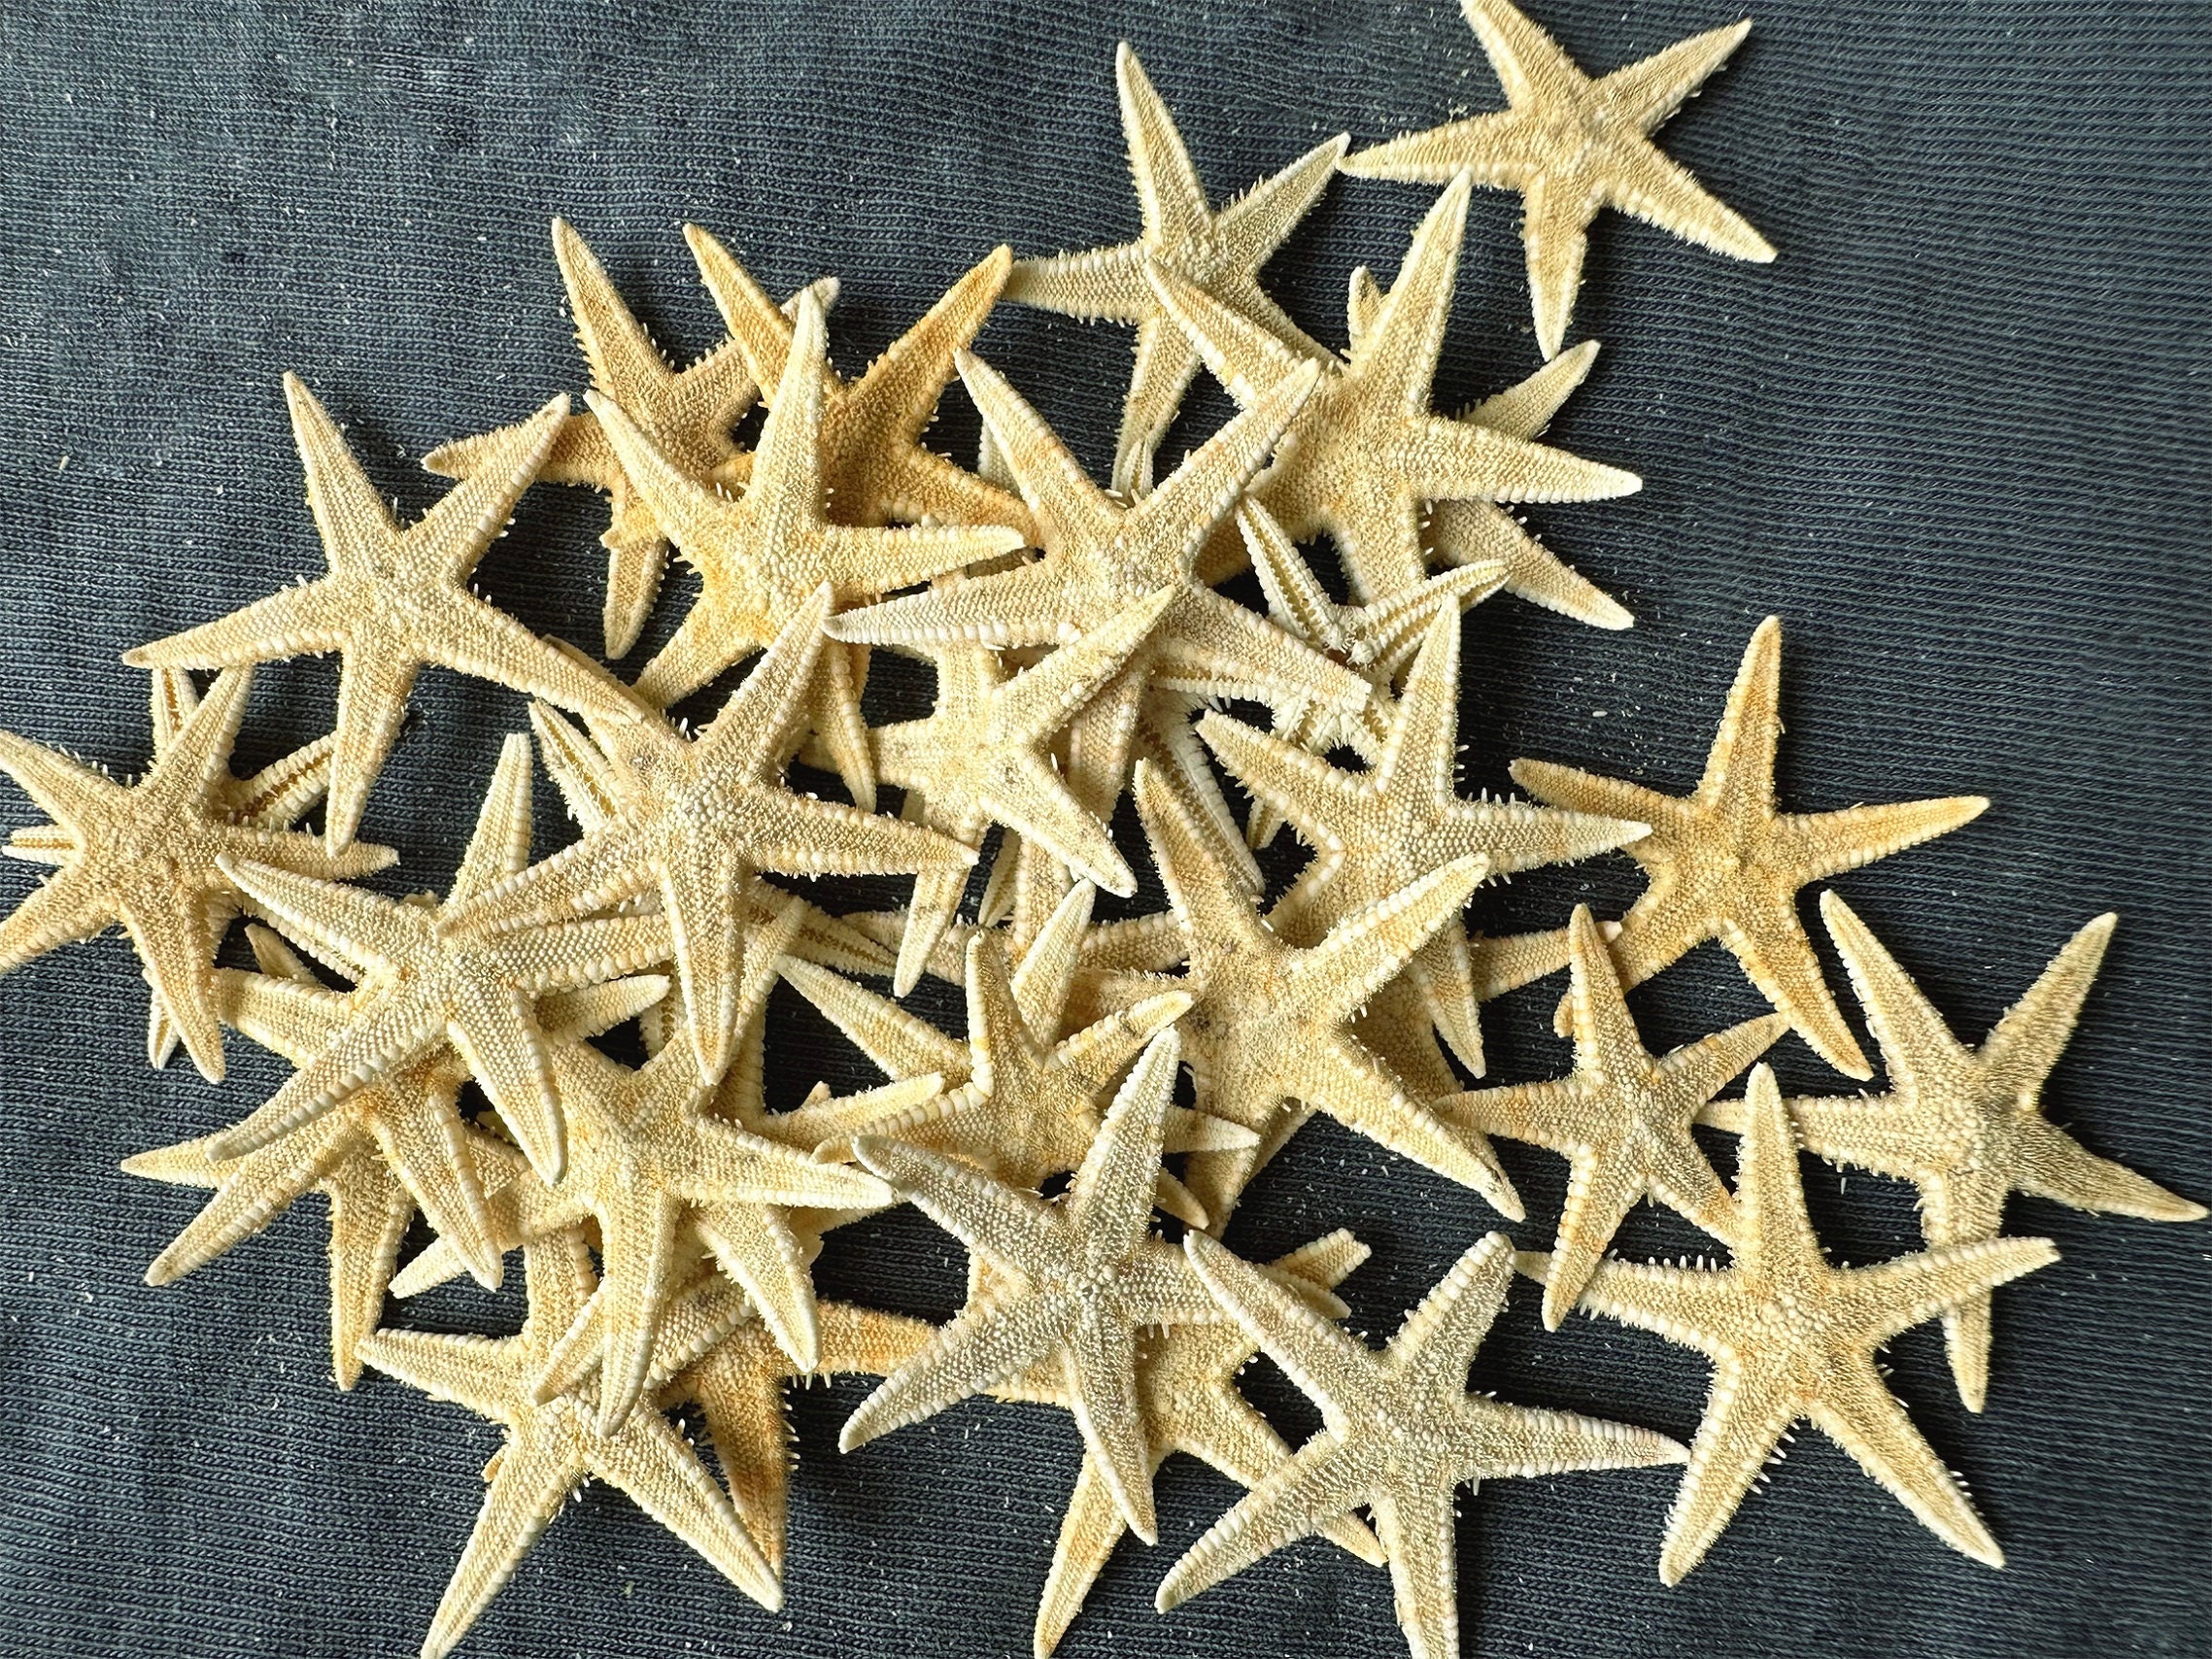 Buy Real Dried Star Fish Online In India -  India